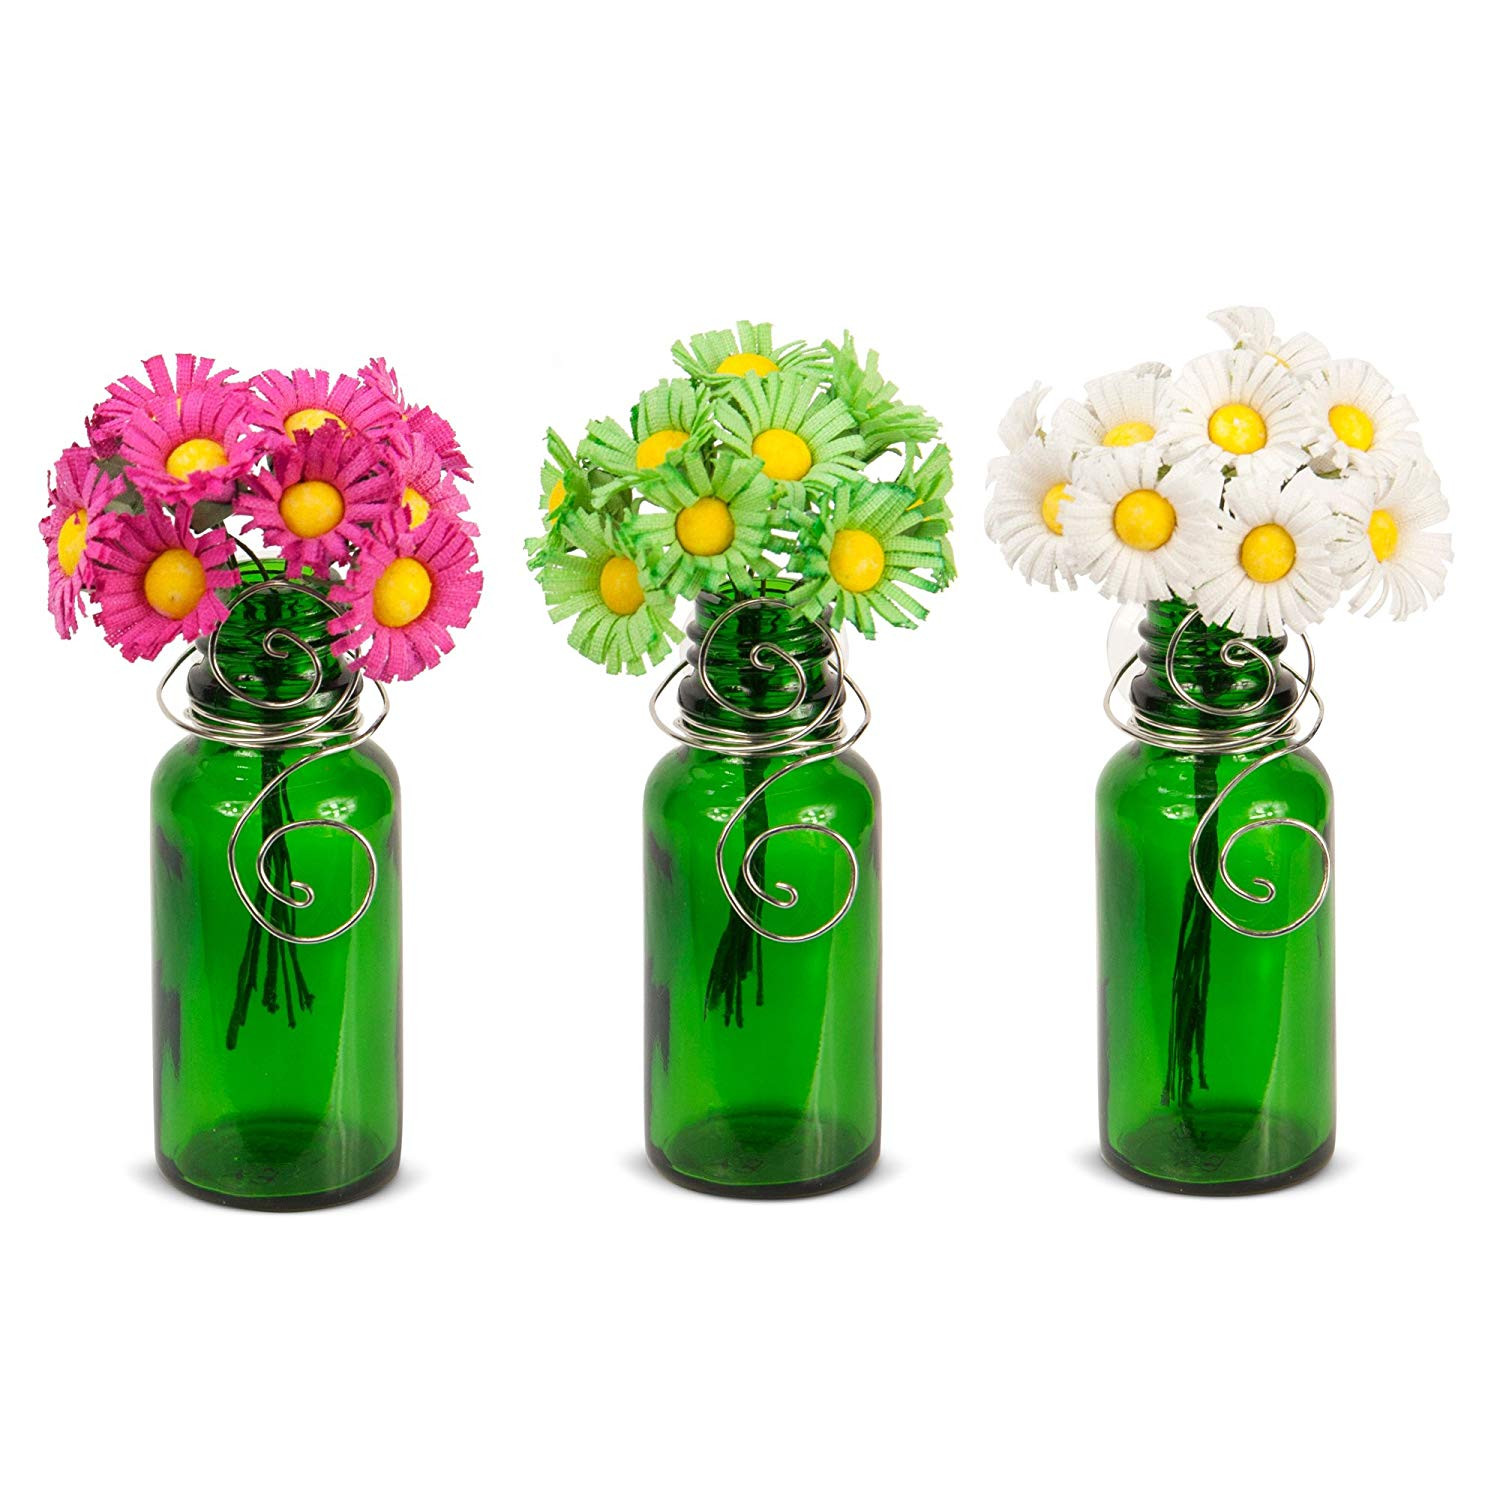 15 Ideal Wine Bottle Wall Vase 2024 free download wine bottle wall vase of amazon com vazzini mini vase bouquet suction cup bud bottle pertaining to amazon com vazzini mini vase bouquet suction cup bud bottle holder with flowers decorative 